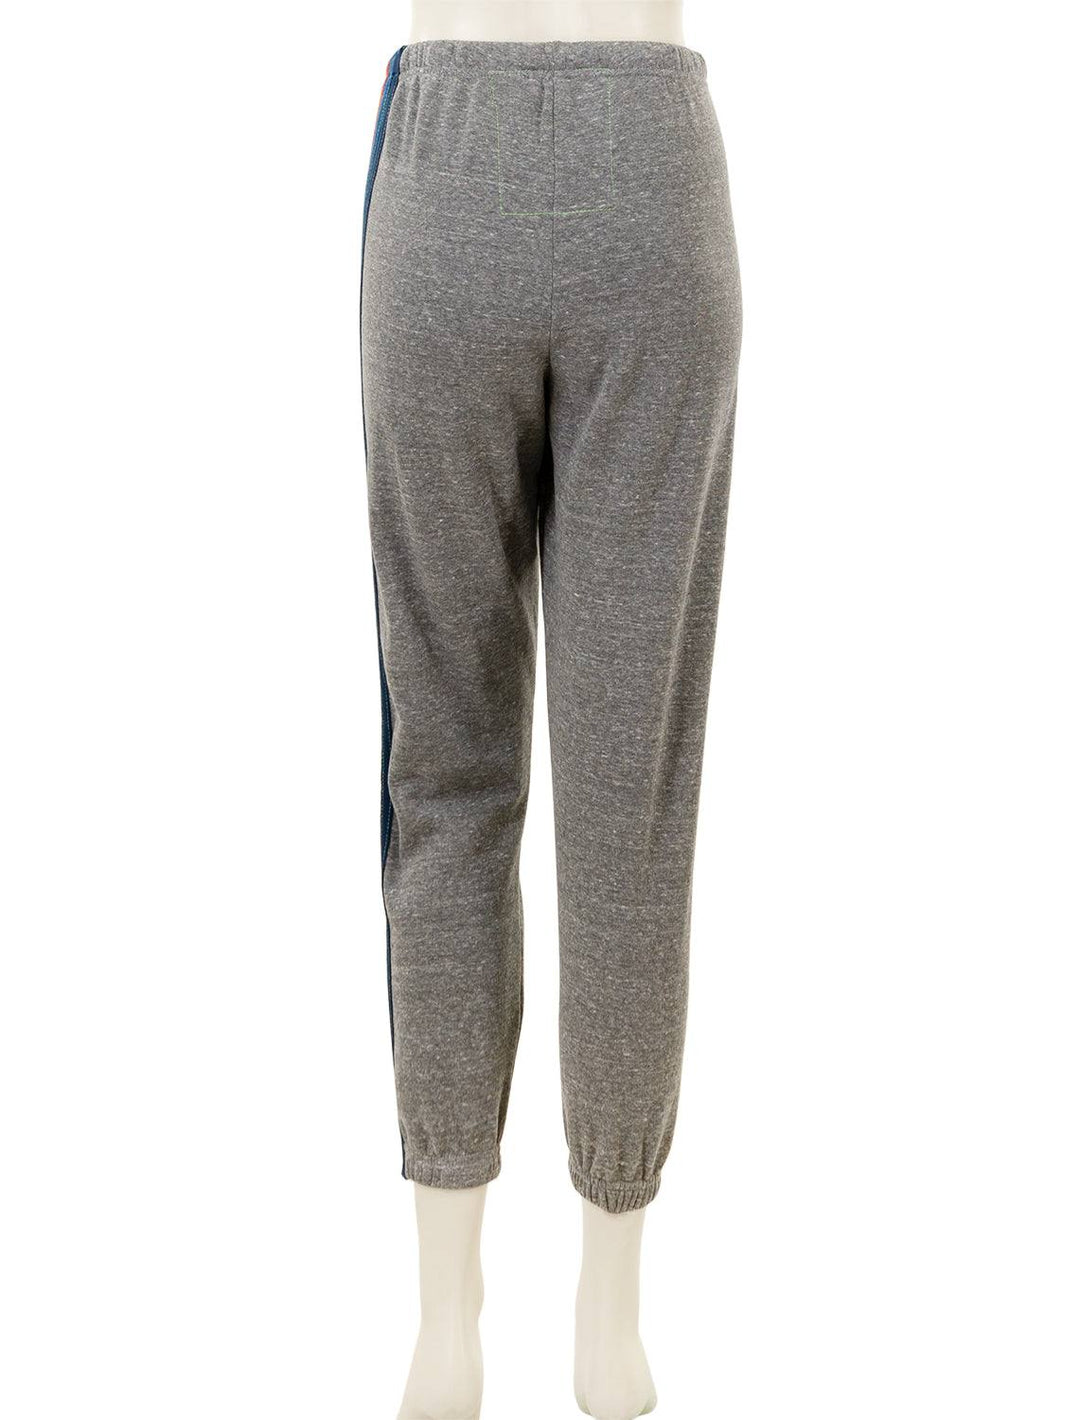 Back view of Aviator Nation's 5 stripe womens sweatpants in heather grey.